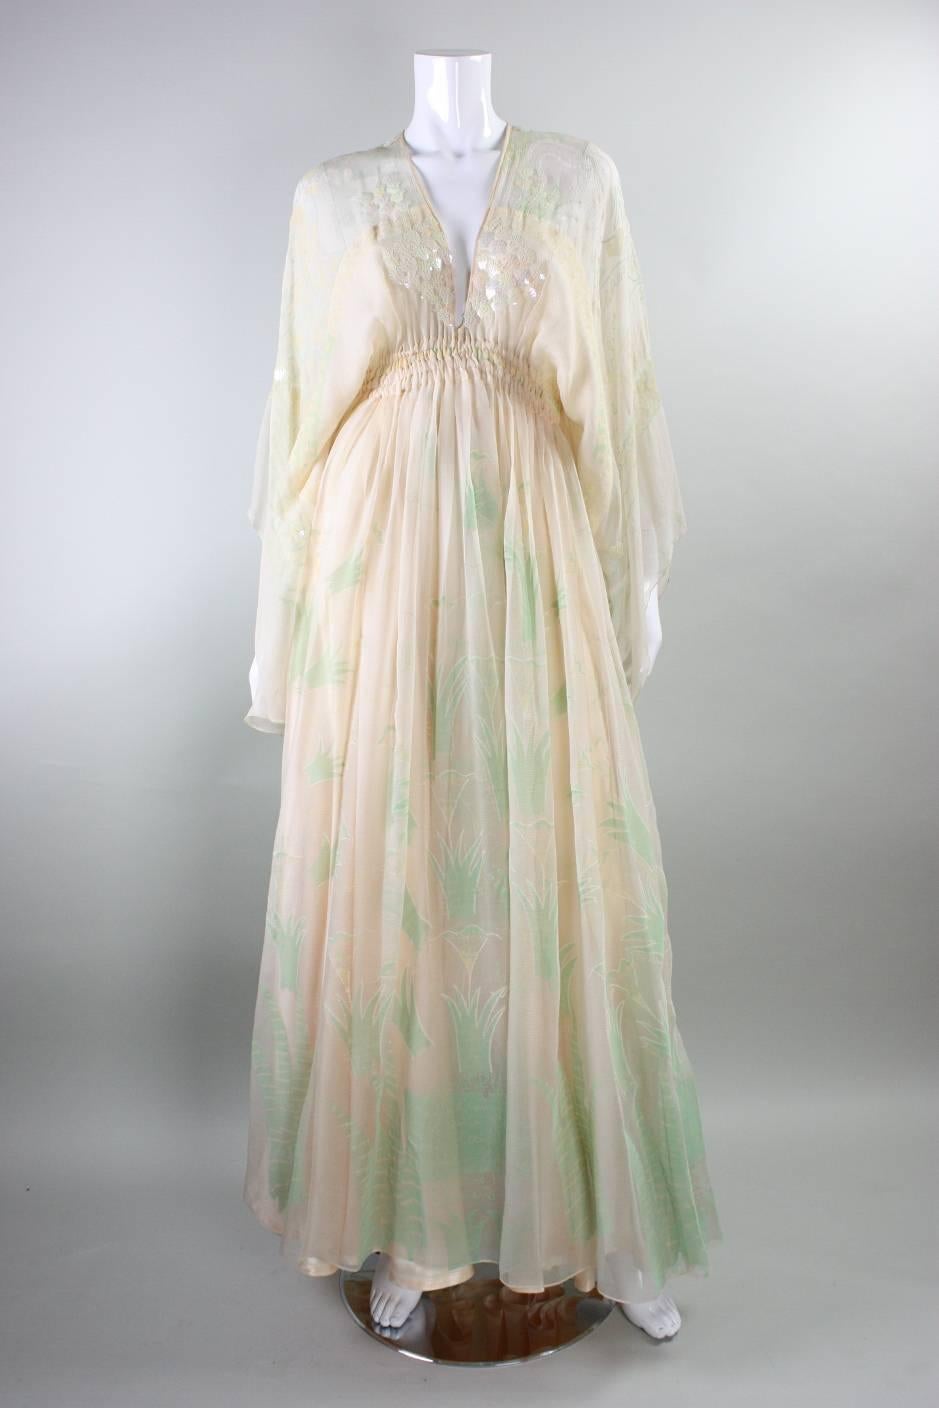 Vintage and iconic Zandra Rhodes Field of Lilies gown dates to the 1970's.  It is made of pale peach chiffon that has silkscreened images and wording throughout.  Leaf-shaped iridescent paillettes highlight the bust.  Elasticized waist is tightly